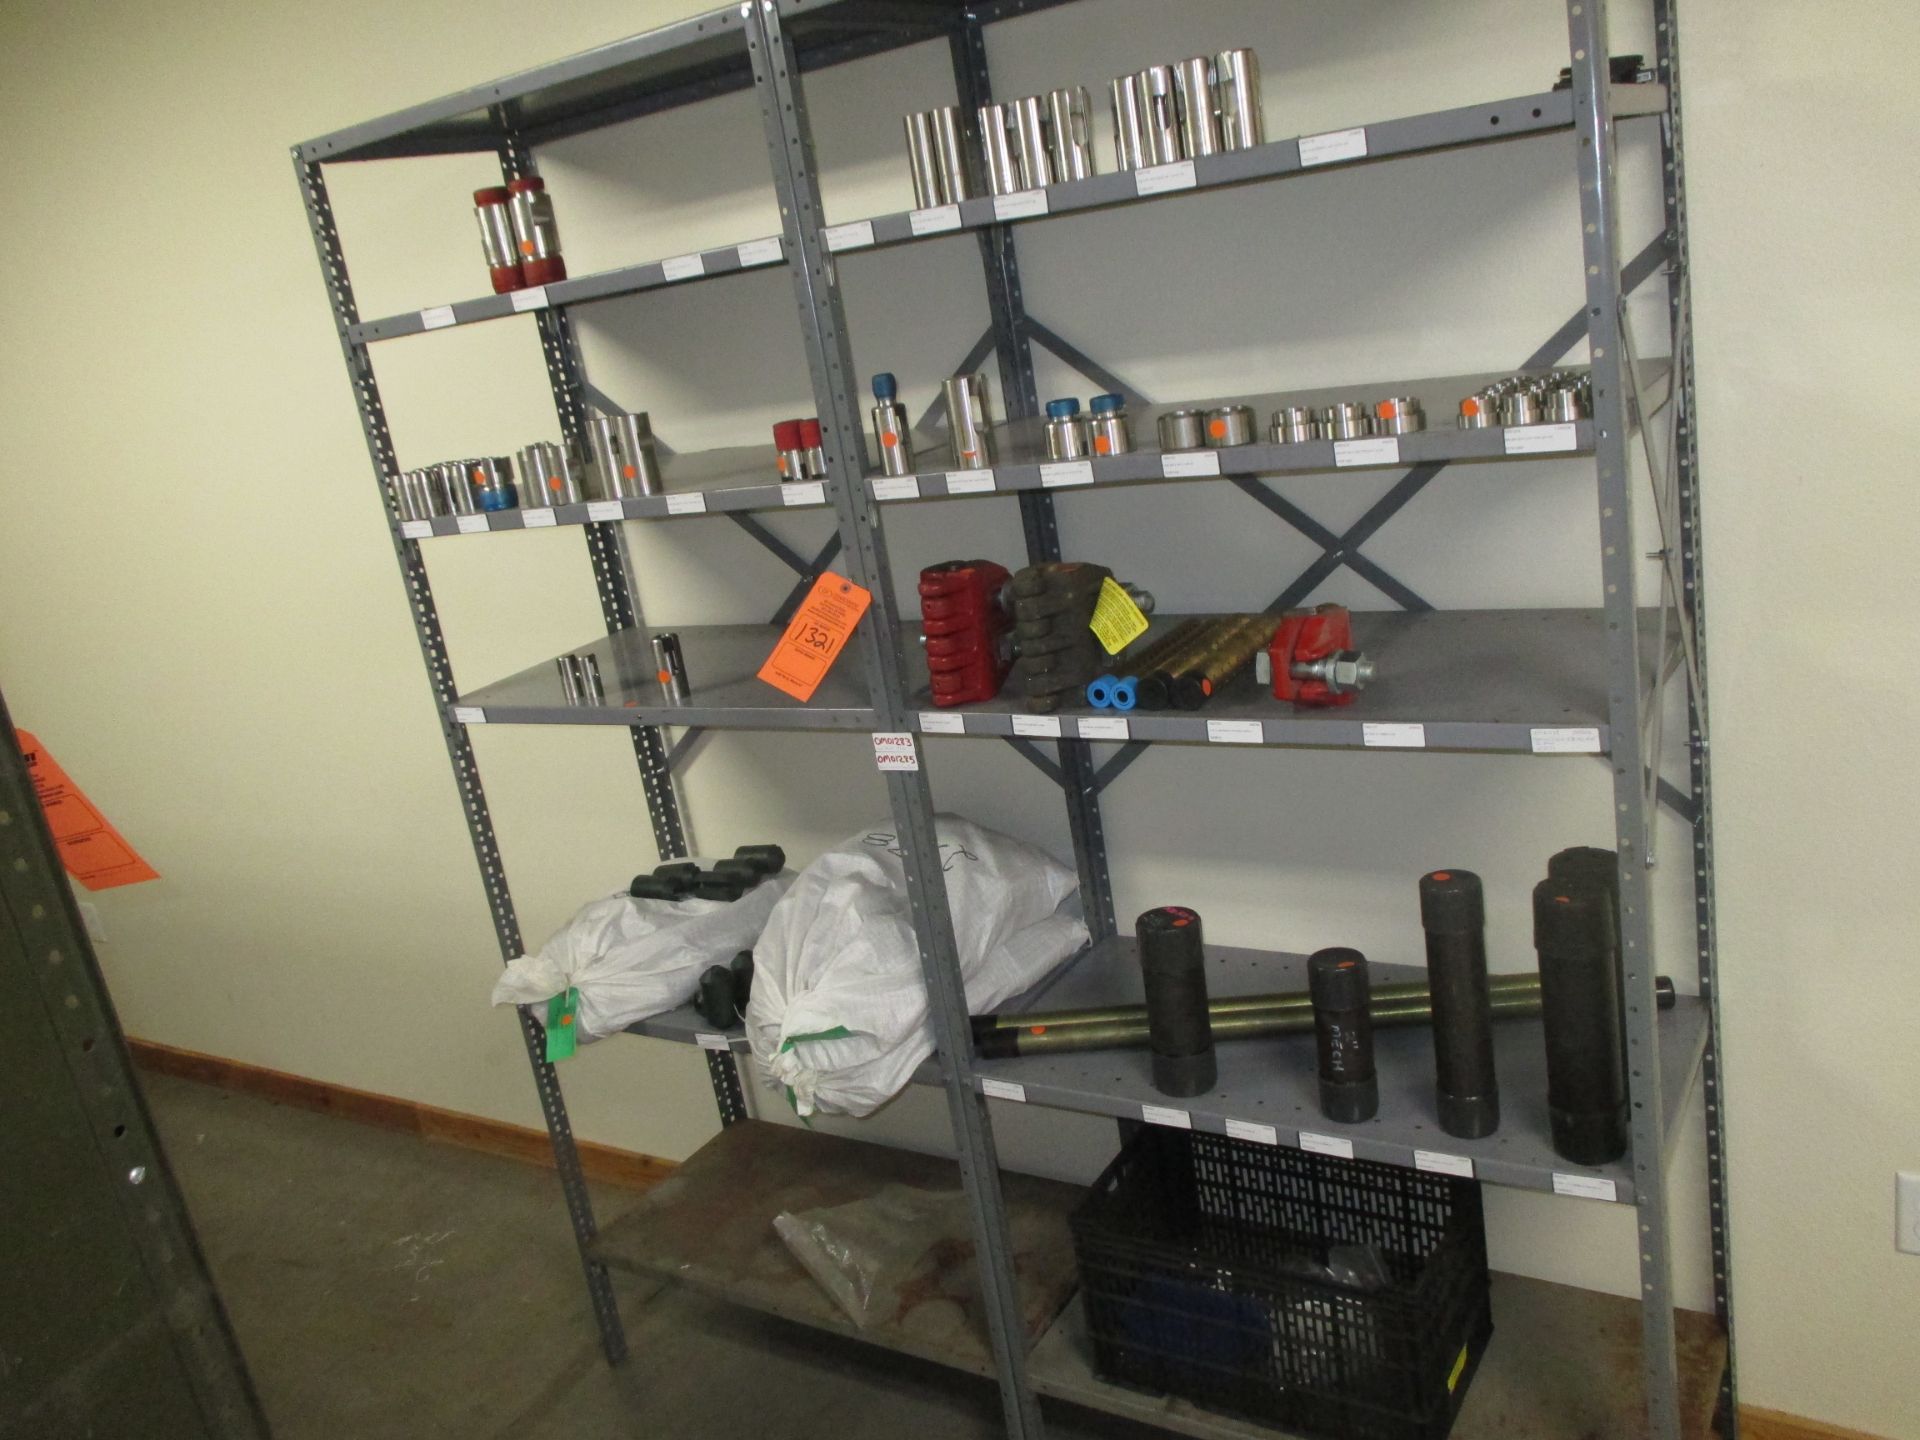 CONTENT OF SHELF INCLUDING ALL CLAMPS; ENDURALL ROD GUIDES; CONNECTORS & TUBES OF VARIOUS SIZES (